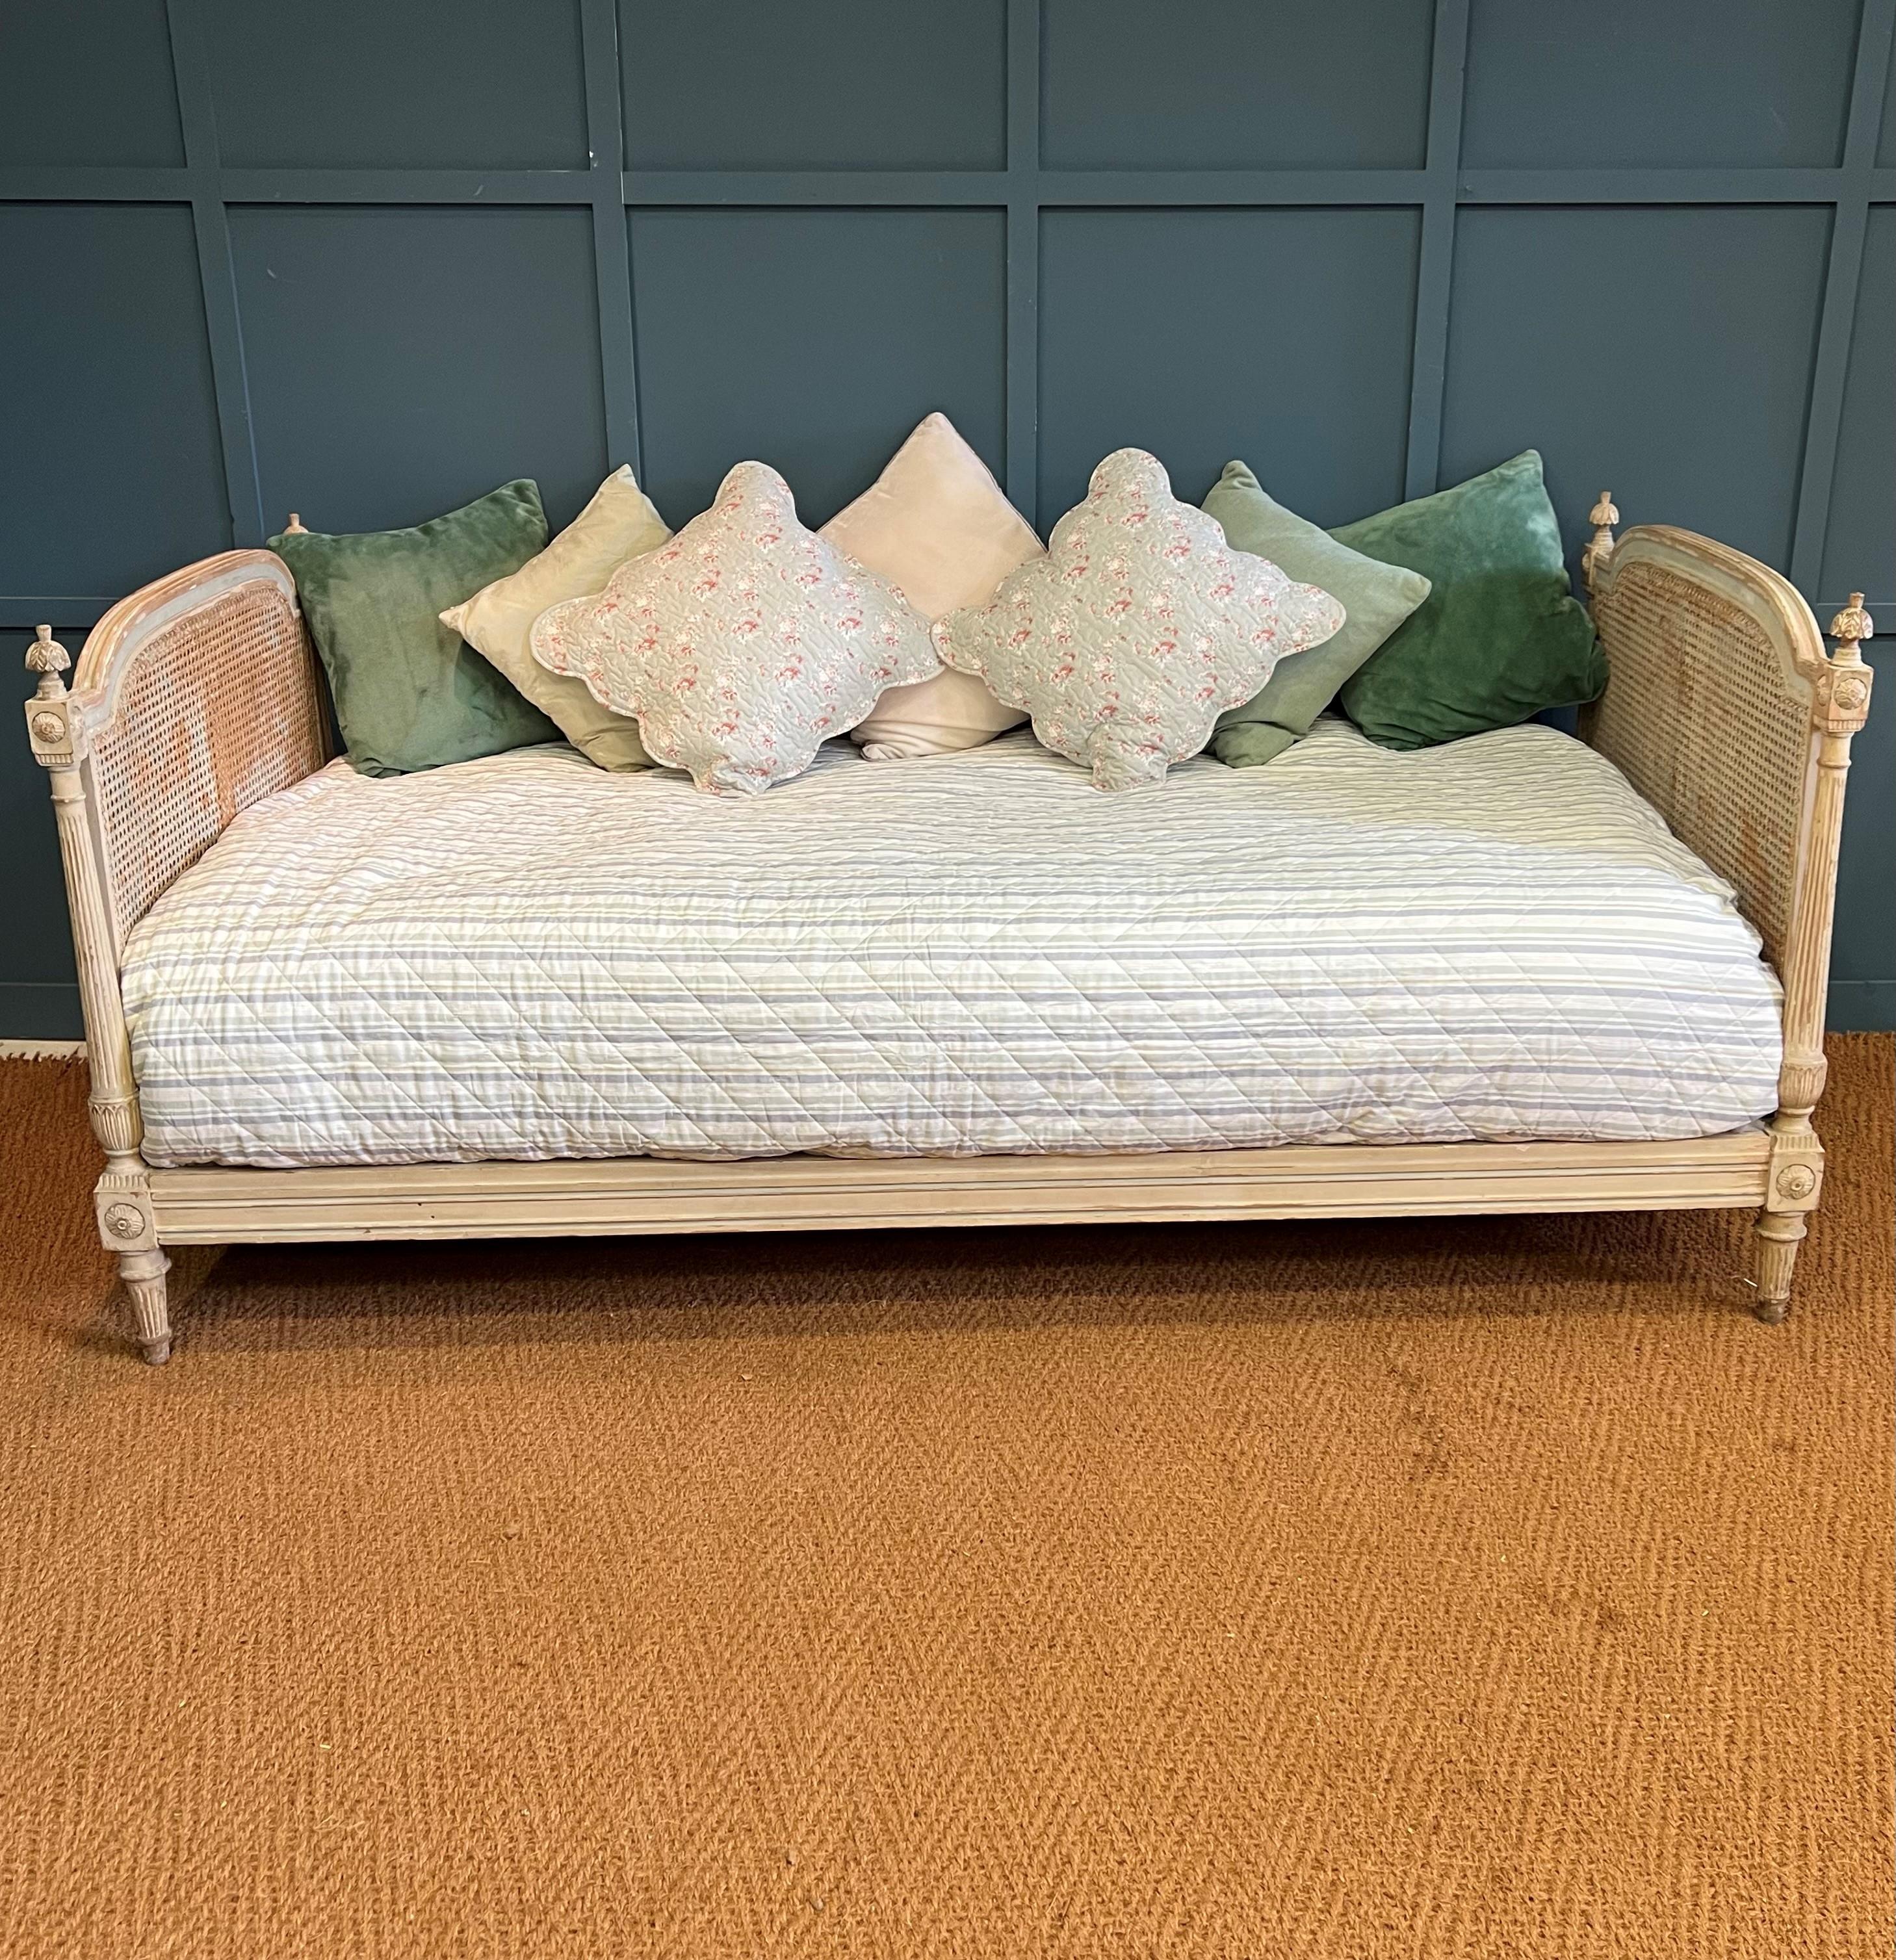 A very pretty antique French caned day bed. The frame has the original paint which has flaked off in places to expose the wood. On each corner is a cute carved palm tree. The day bed is made of a Beech frame and has very pale blue banding paint on